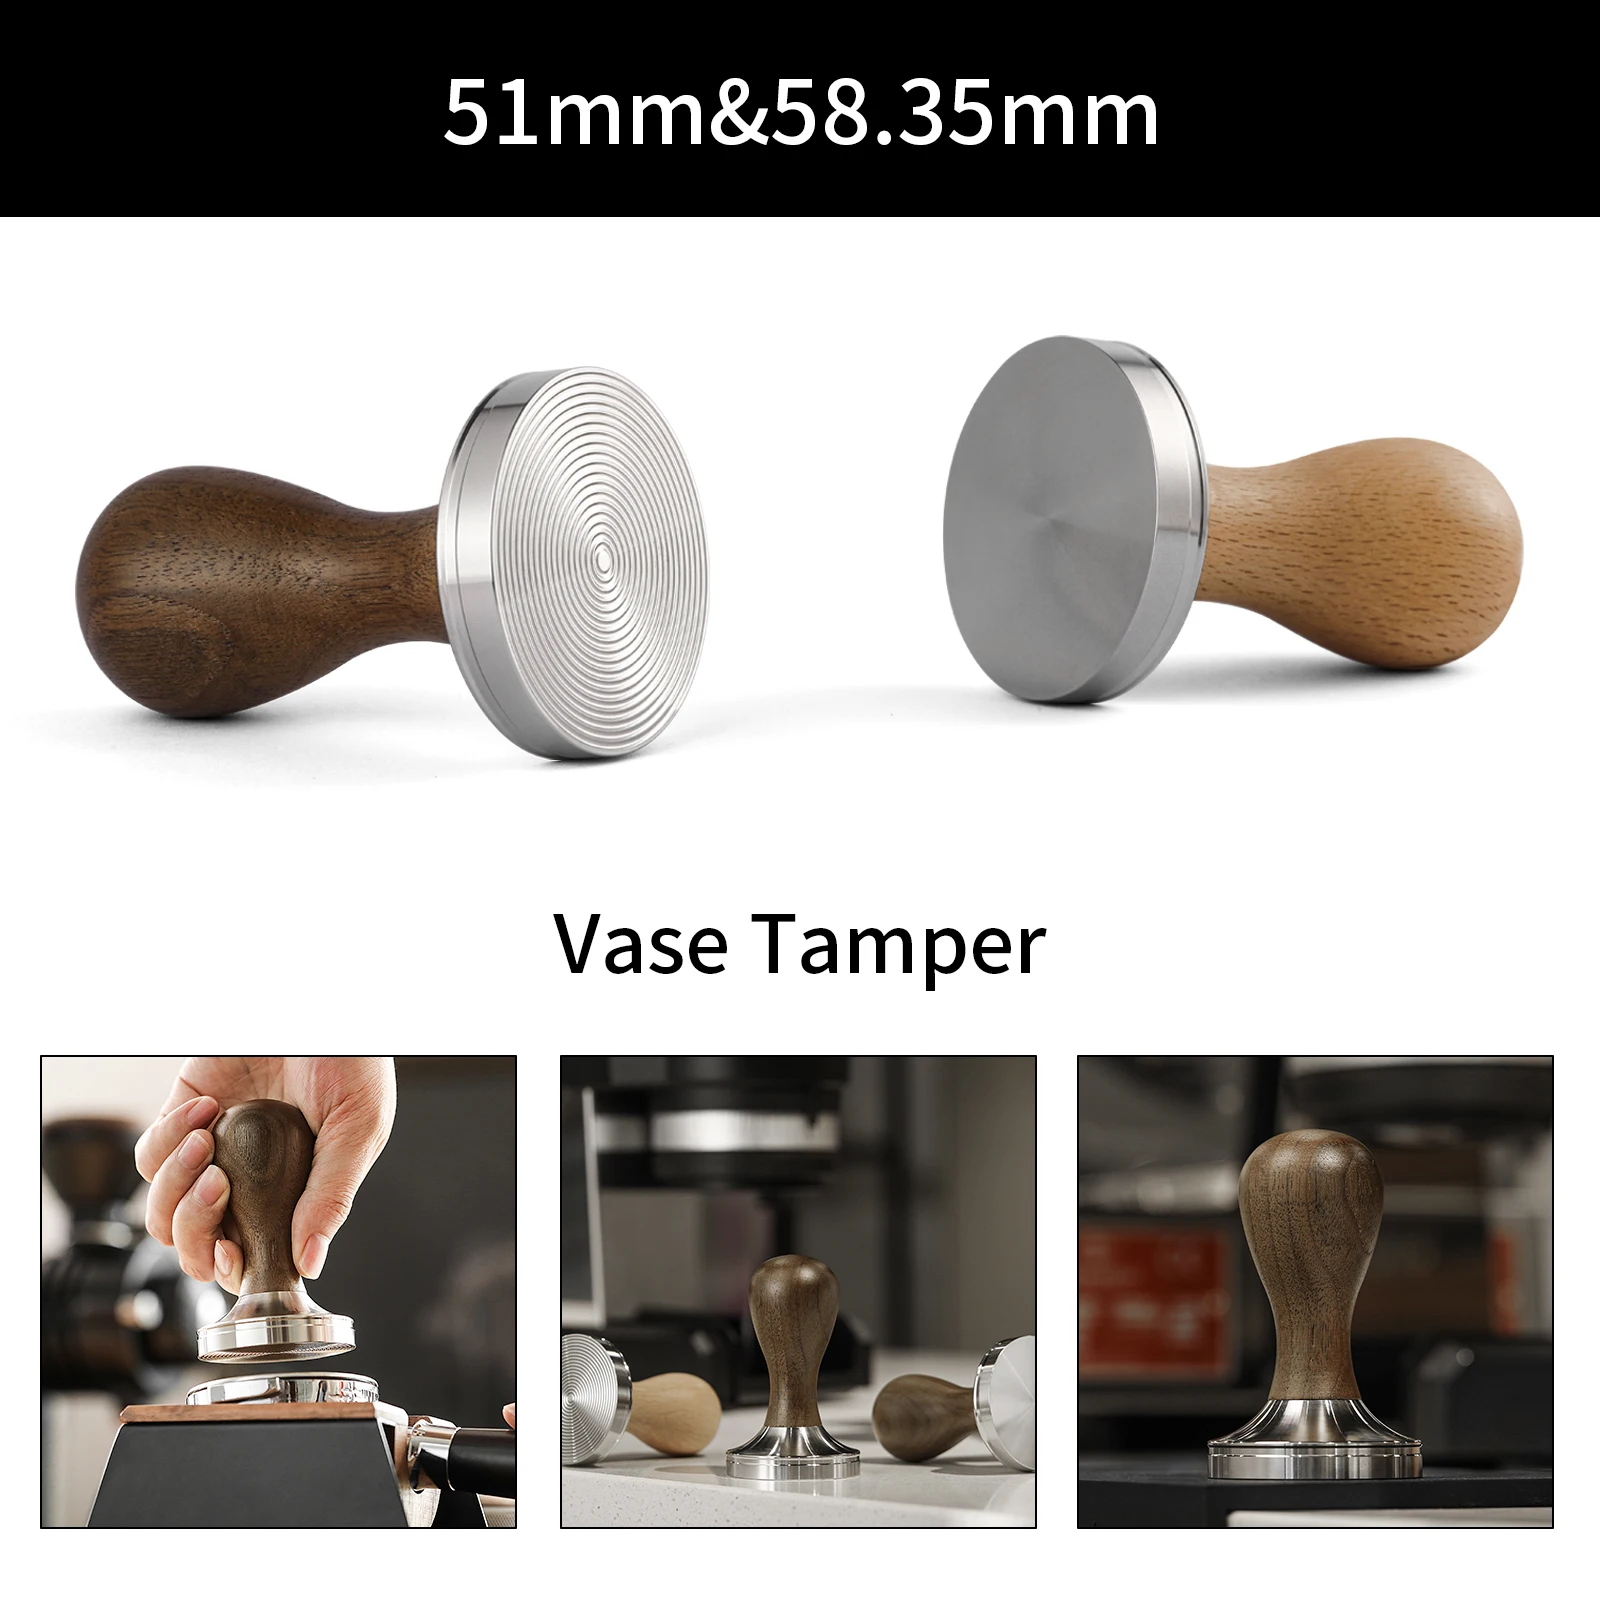 

MHW-3BOMBER 51mm 58.35mm Calibrated Espresso Tamper with Wooden Handle Stainless Steel Base Chic Home Barista Coffee Accessories